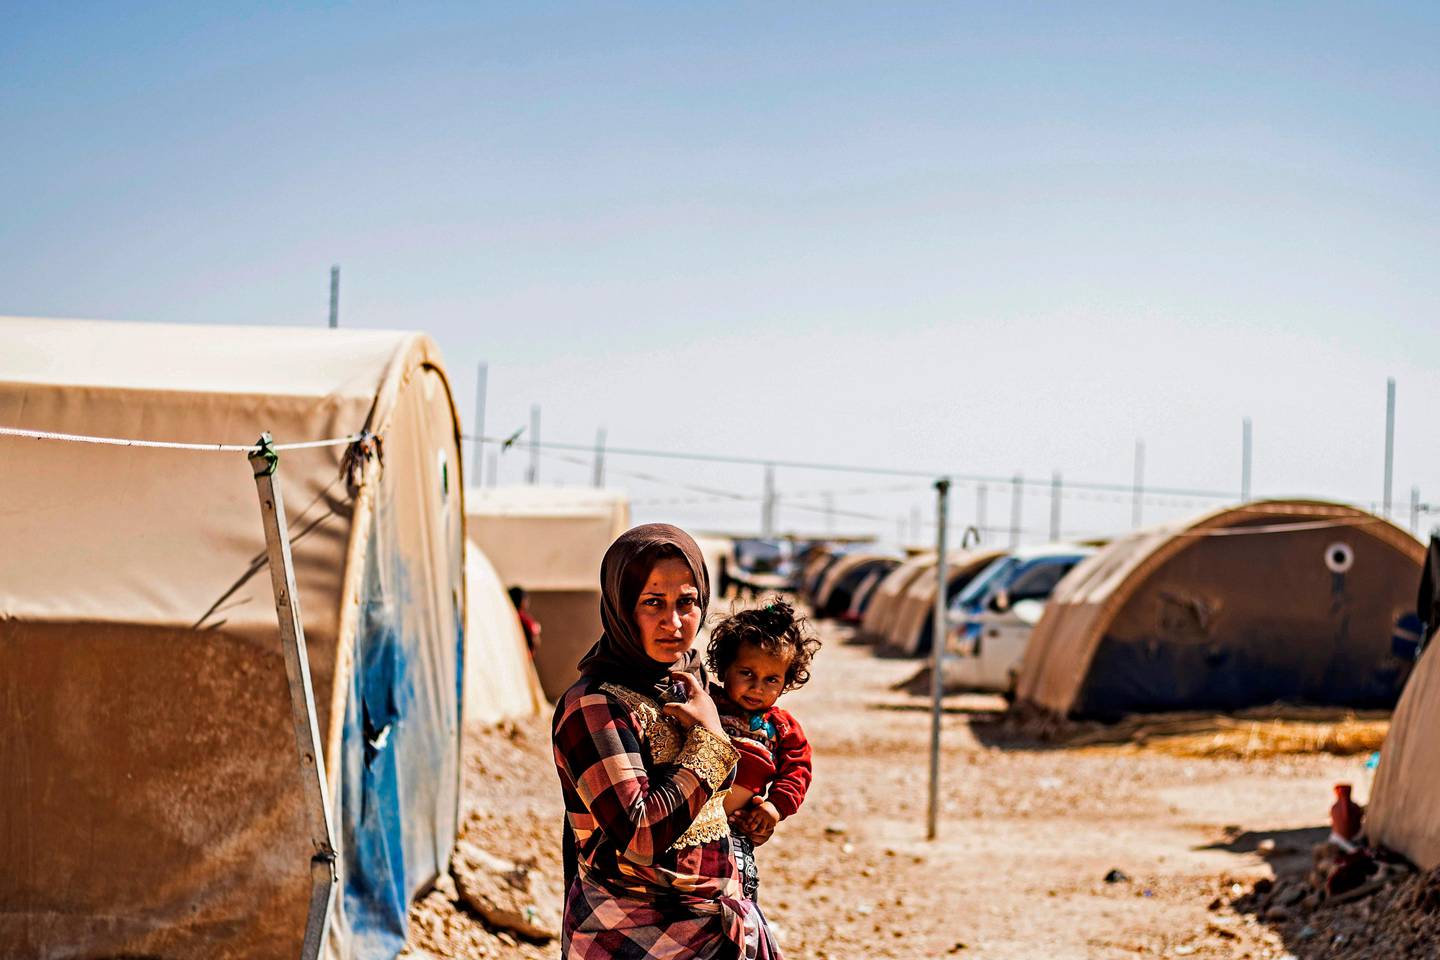 A woman stands carrying a child at the Washukanni camp for the internally displaced near the town of Tuwaynah, west of Syria's northeastern city of Hasakah on October 8, 2020. - Tens of thousands of people were forced out of their homes and into informal settlements in Kurdish-controlled regions south of Syria's border with Turkey. Their homes and belonging have been seized or looted in the year since the Turkish offensive in October 2019 that saw Ankara capture a 120-kilometre (70-mile) long strip along its southern border. (Photo by Delil SOULEIMAN / AFP)